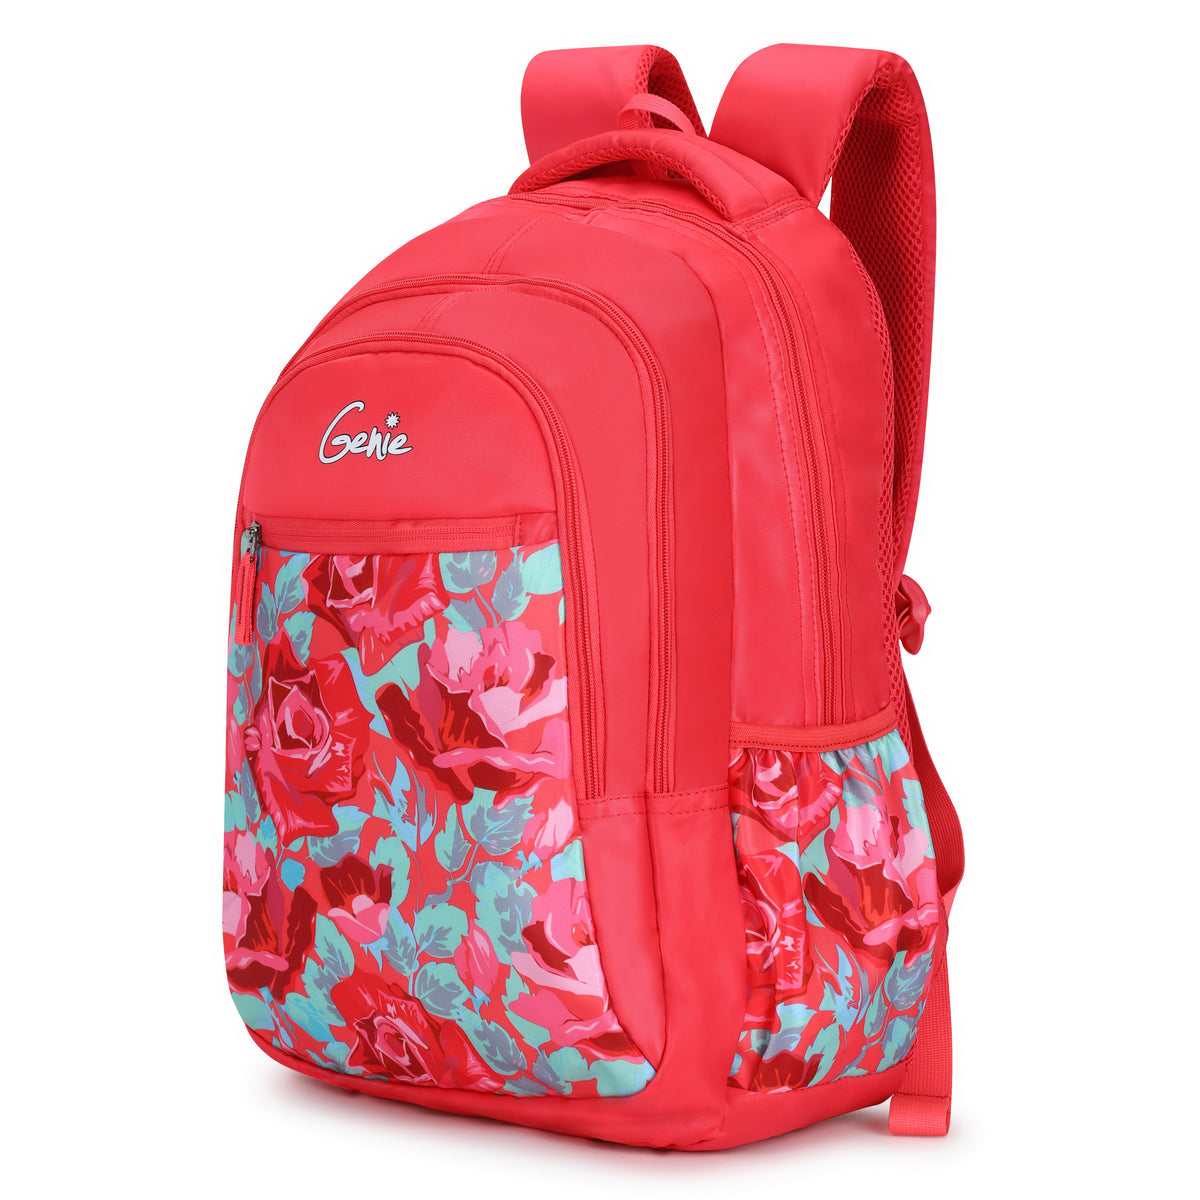 Genie Valentine 27L Pink Juniors Backpack With Easy Access Pockets